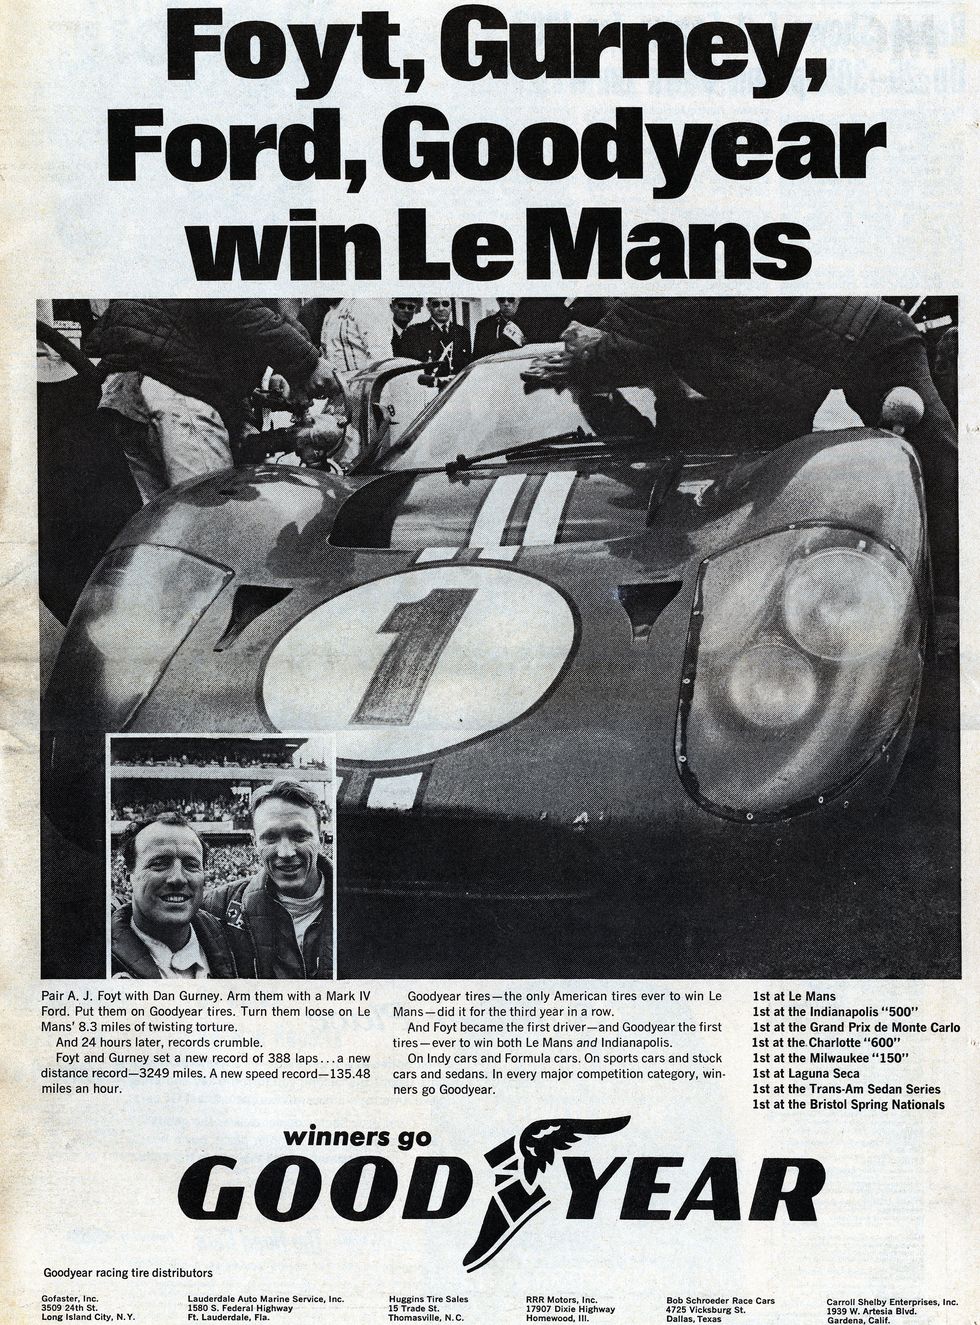 Dan Gurney Explains What it Took to Win Le Mans and F1 One Week Apart